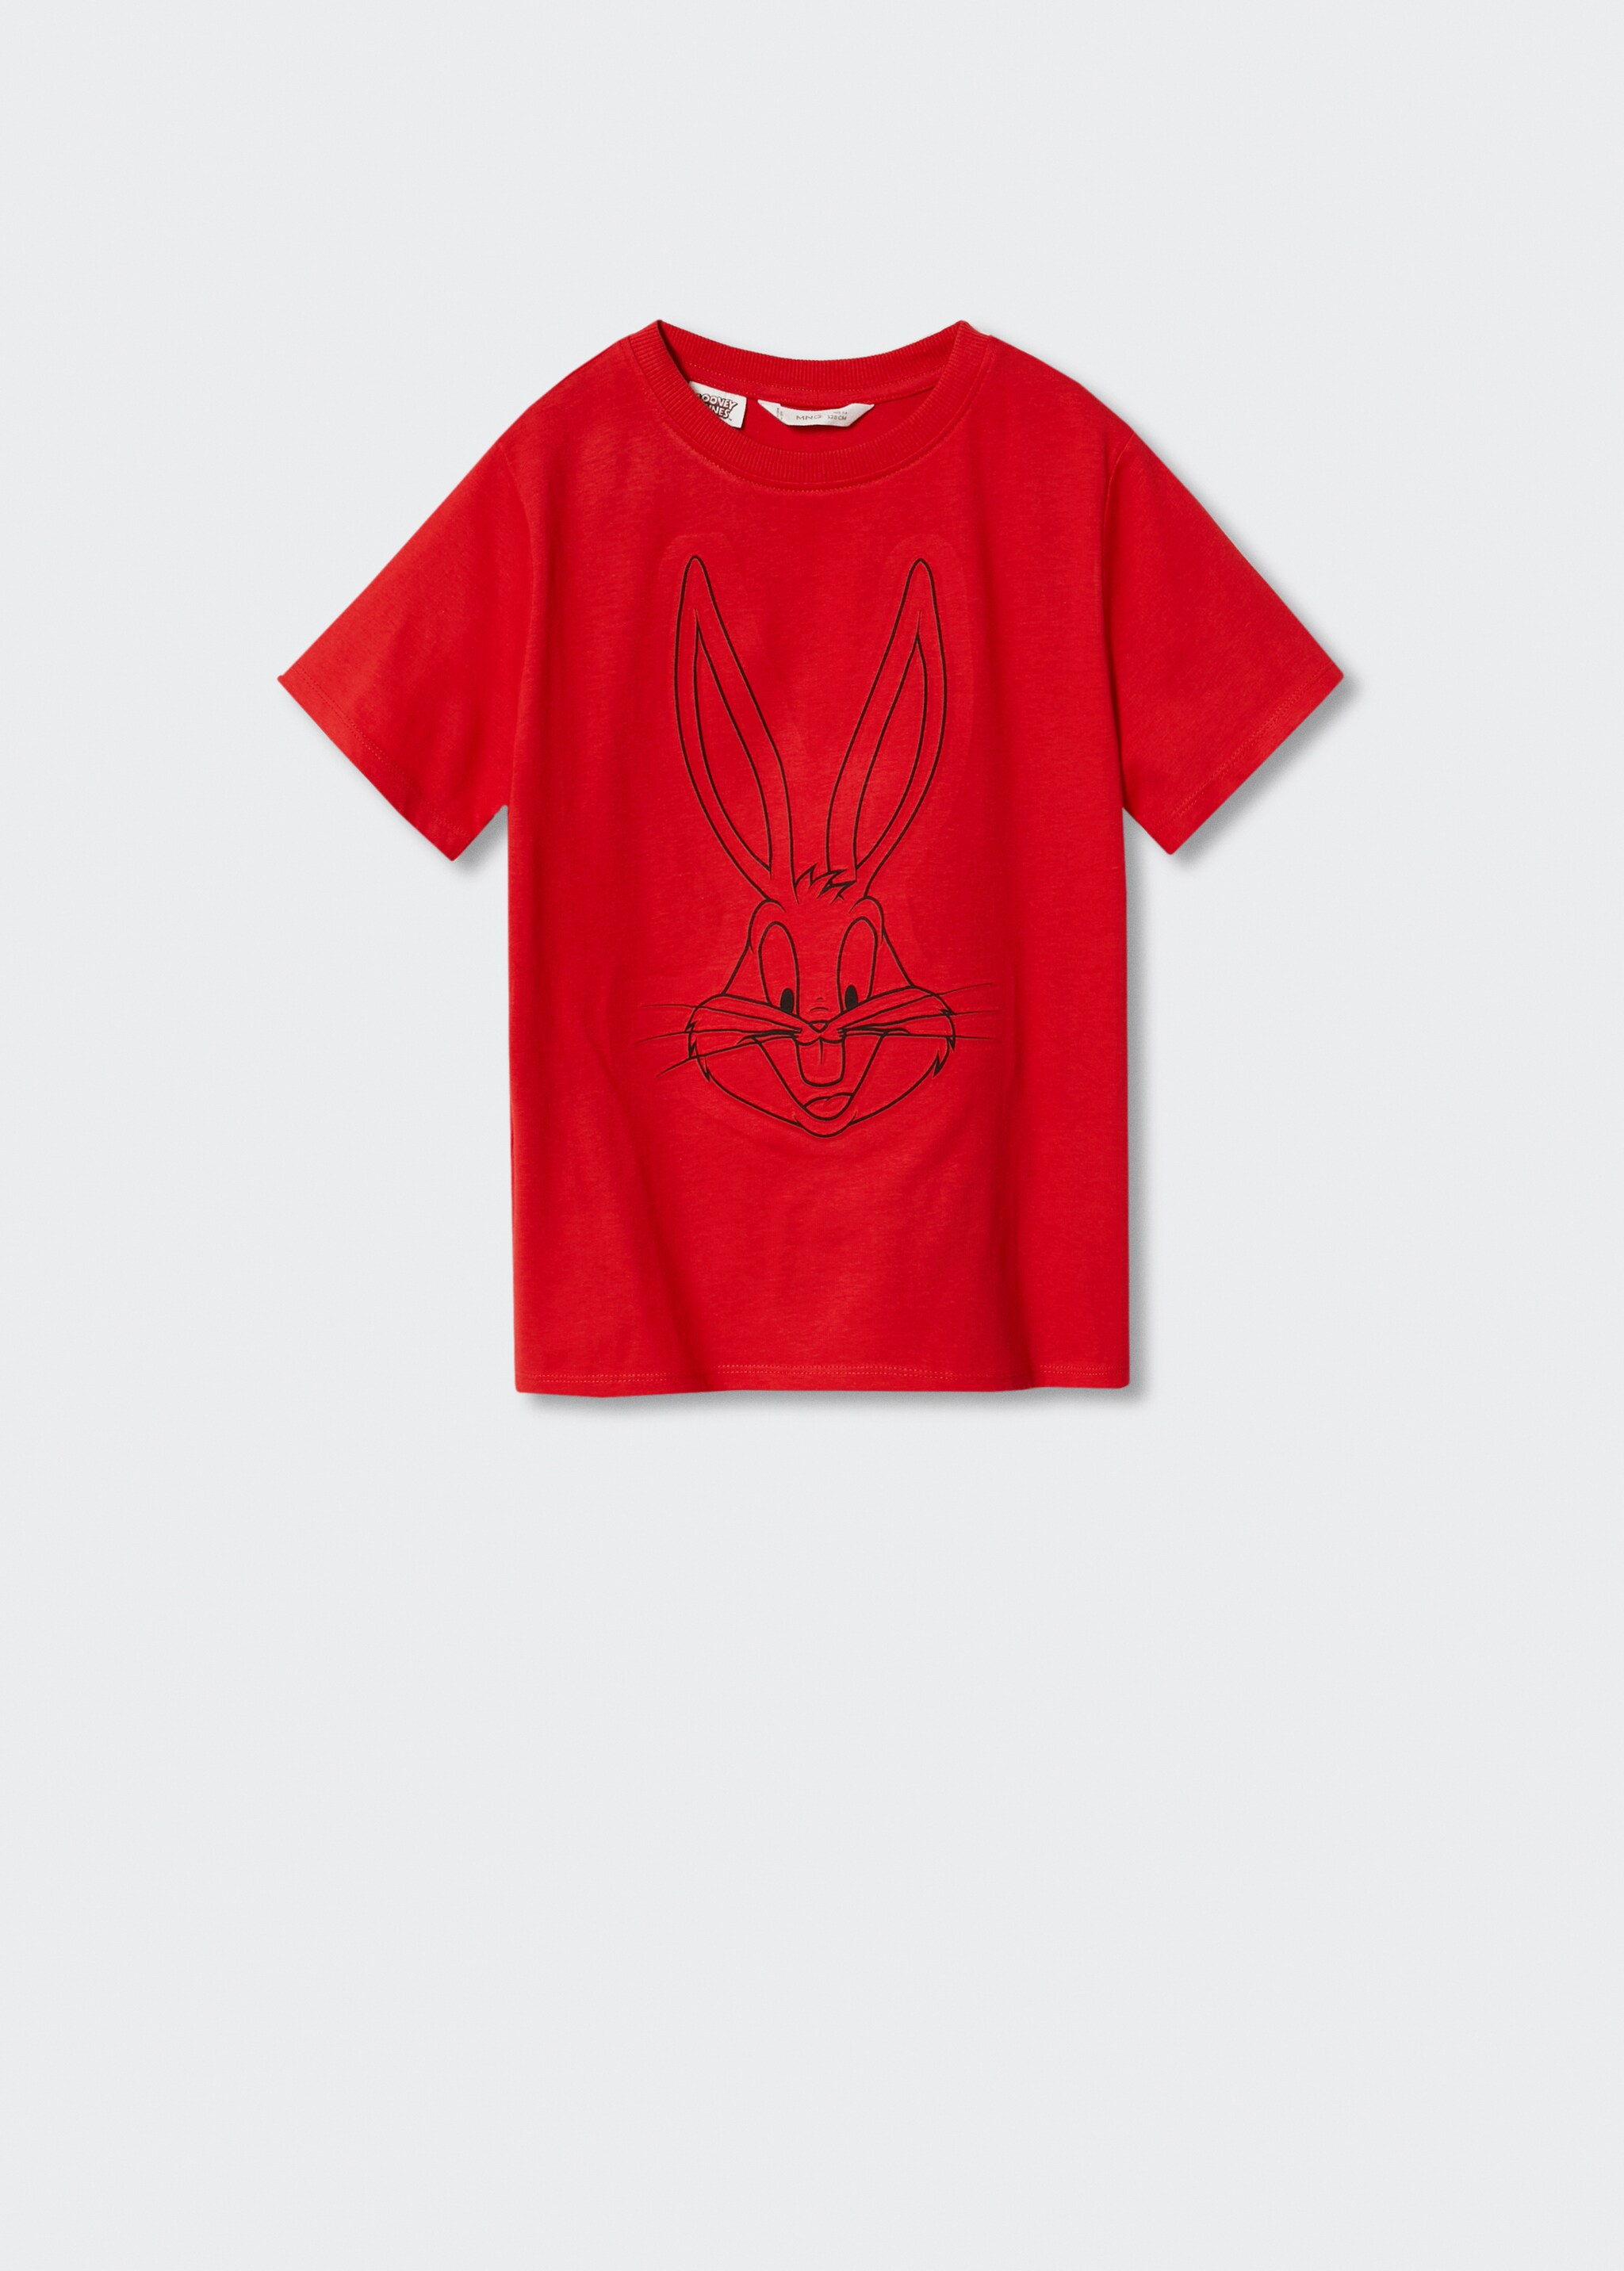 Bugs Bunny t-shirt - Article without model